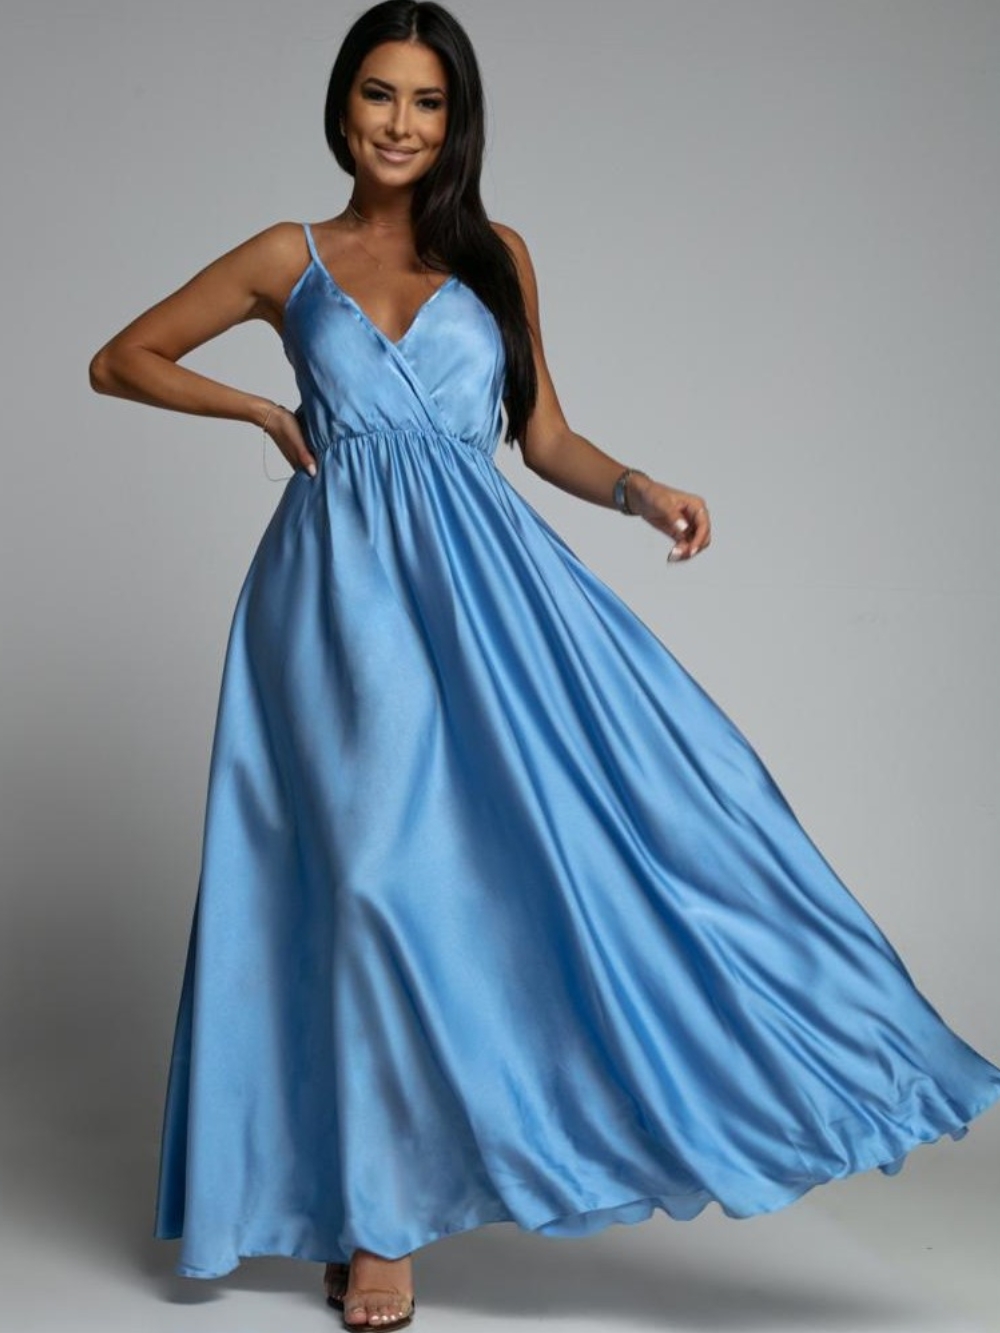 Long blue satin dress with straps